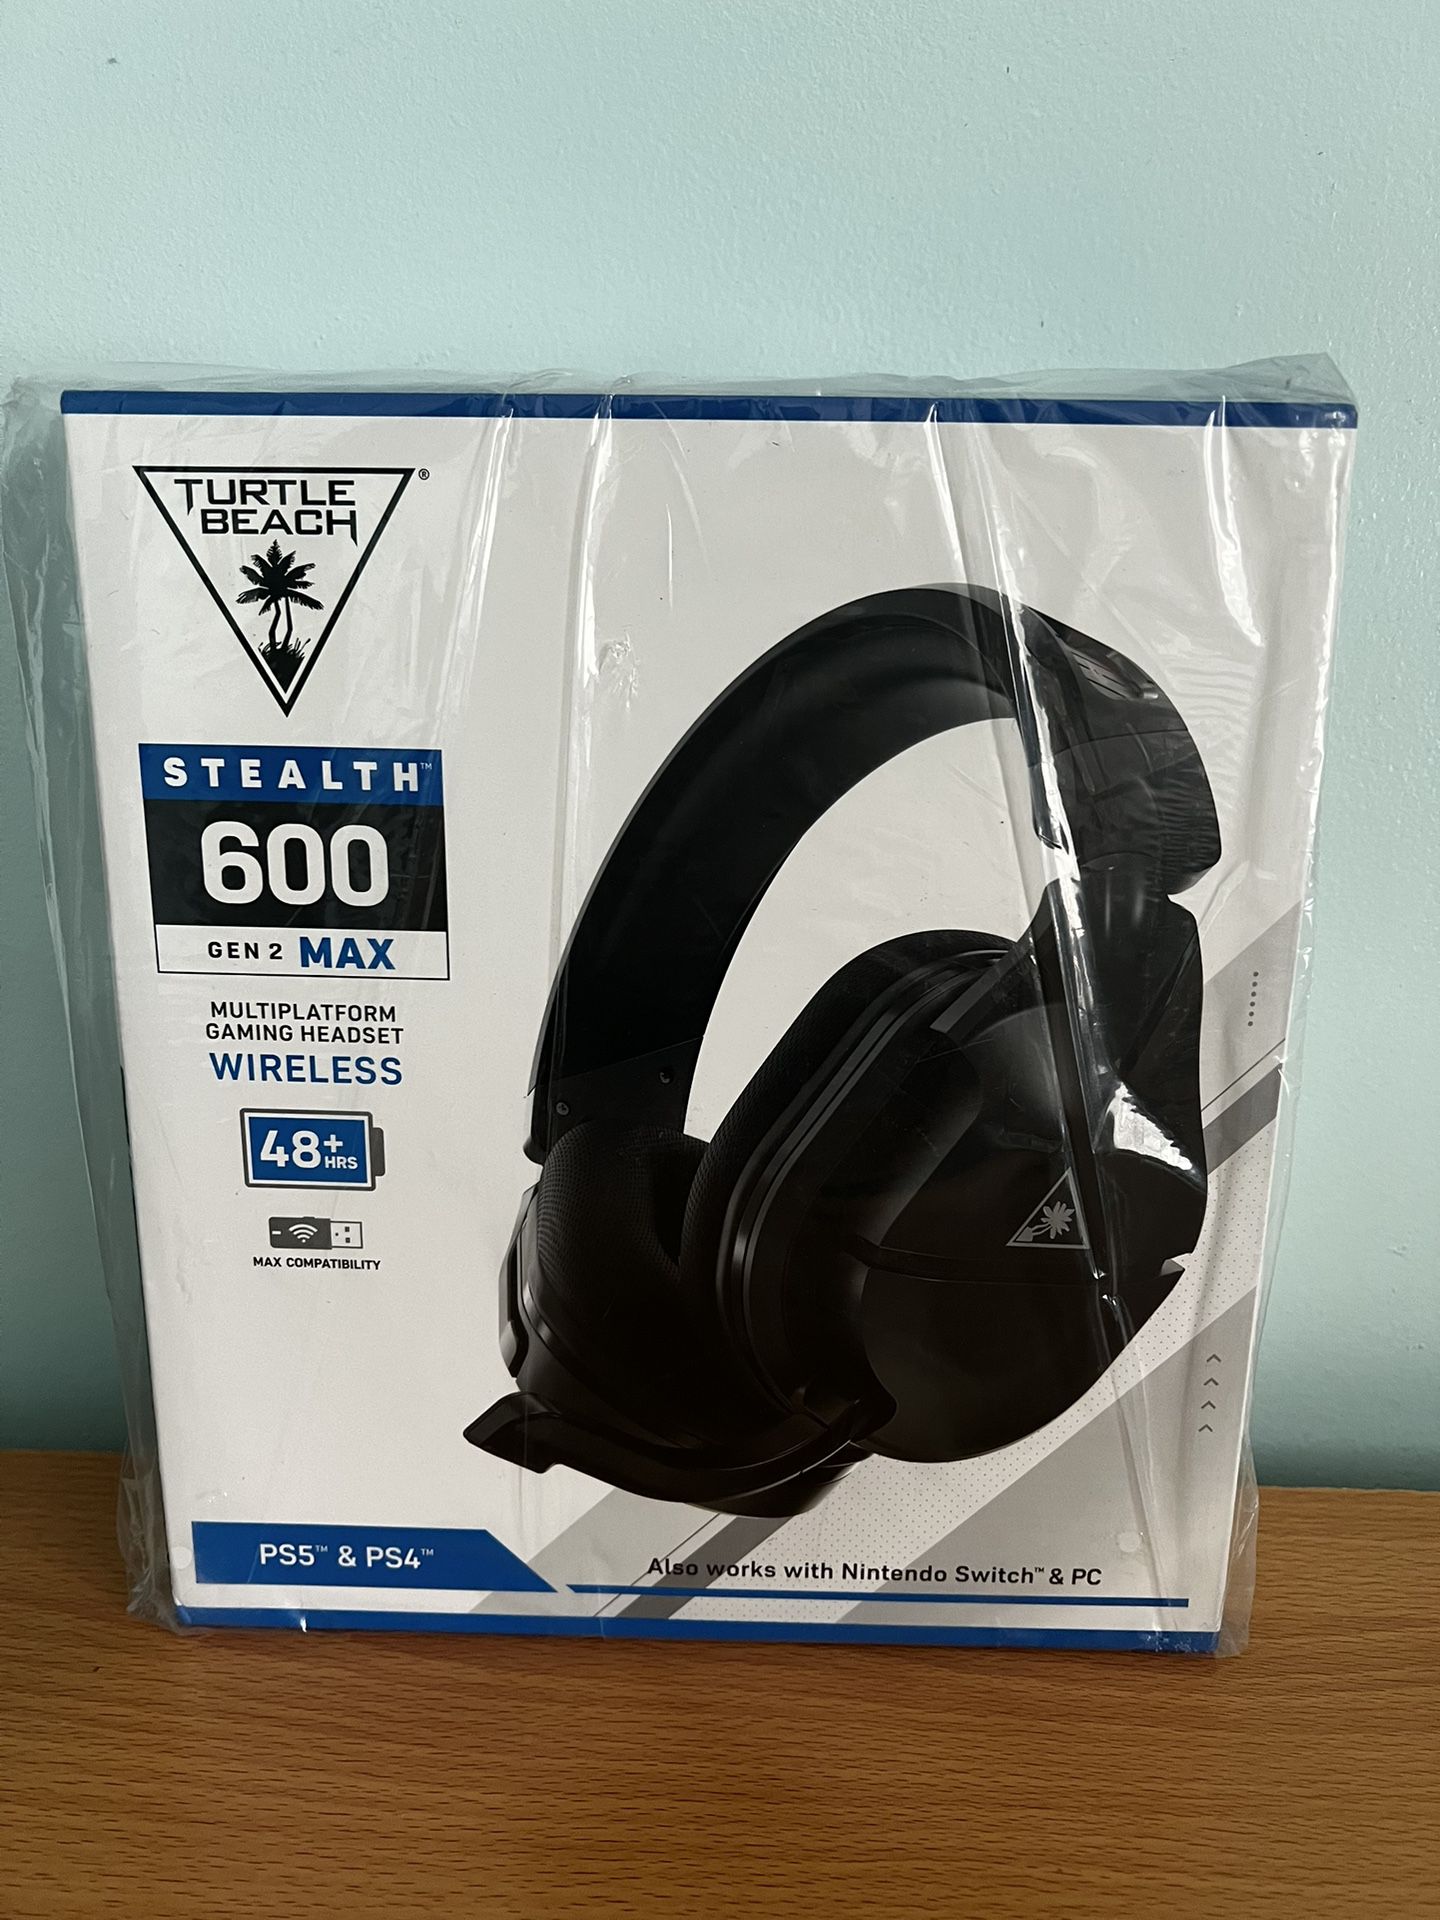 Turtle Beach Stealth 600 Gen 2 MAX Wireless Gaming Headset for PlayStation 4/5/Nintendo Switch/PC - Black